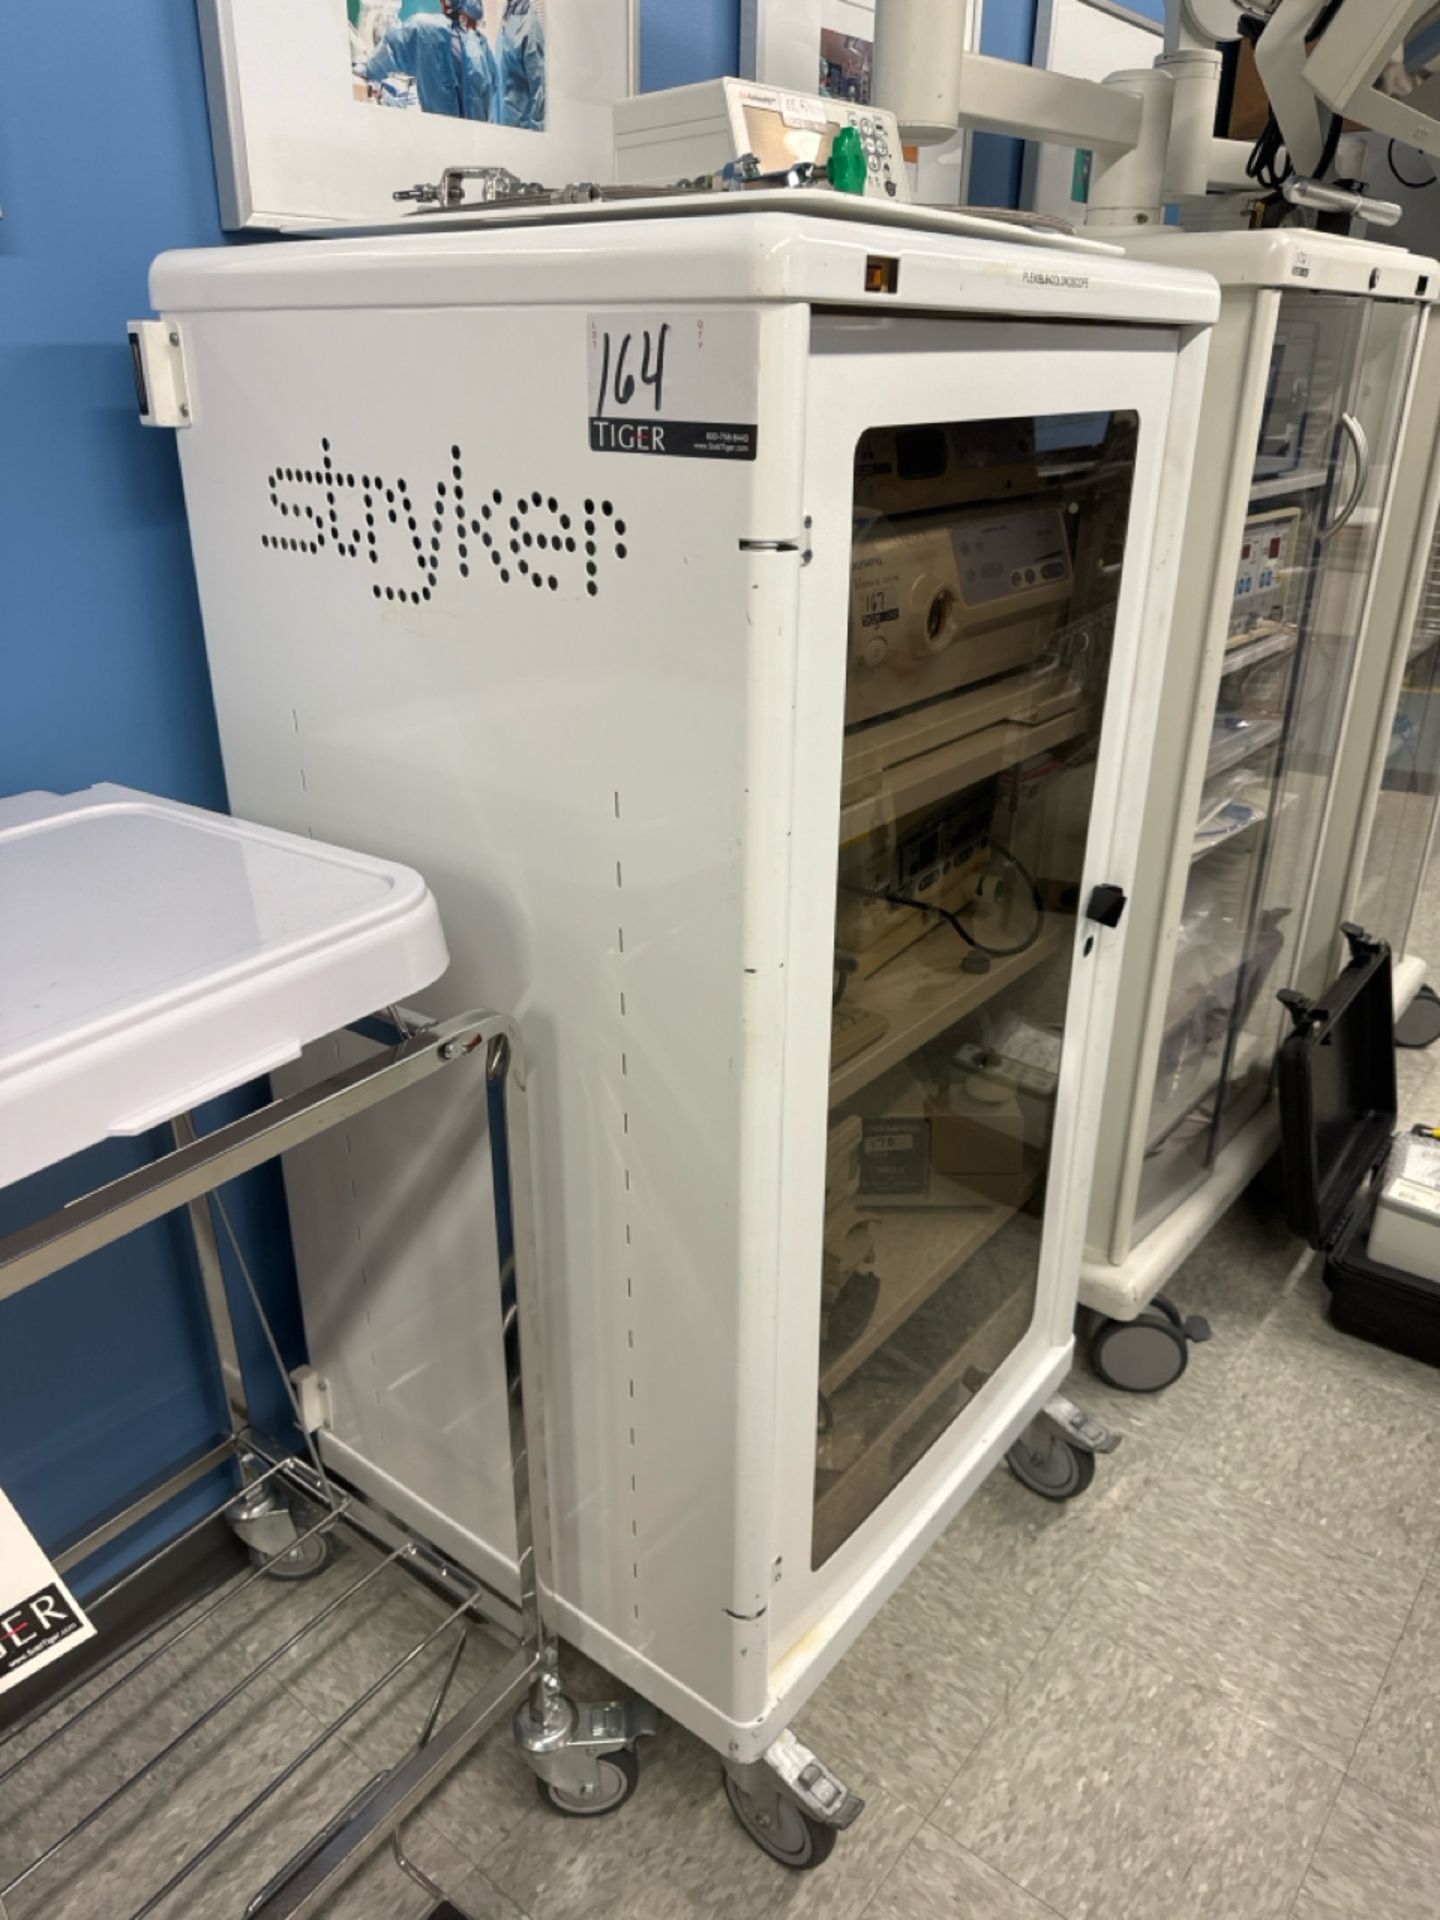 Mobile Stryker Case (Contents Not Included) - Image 2 of 2